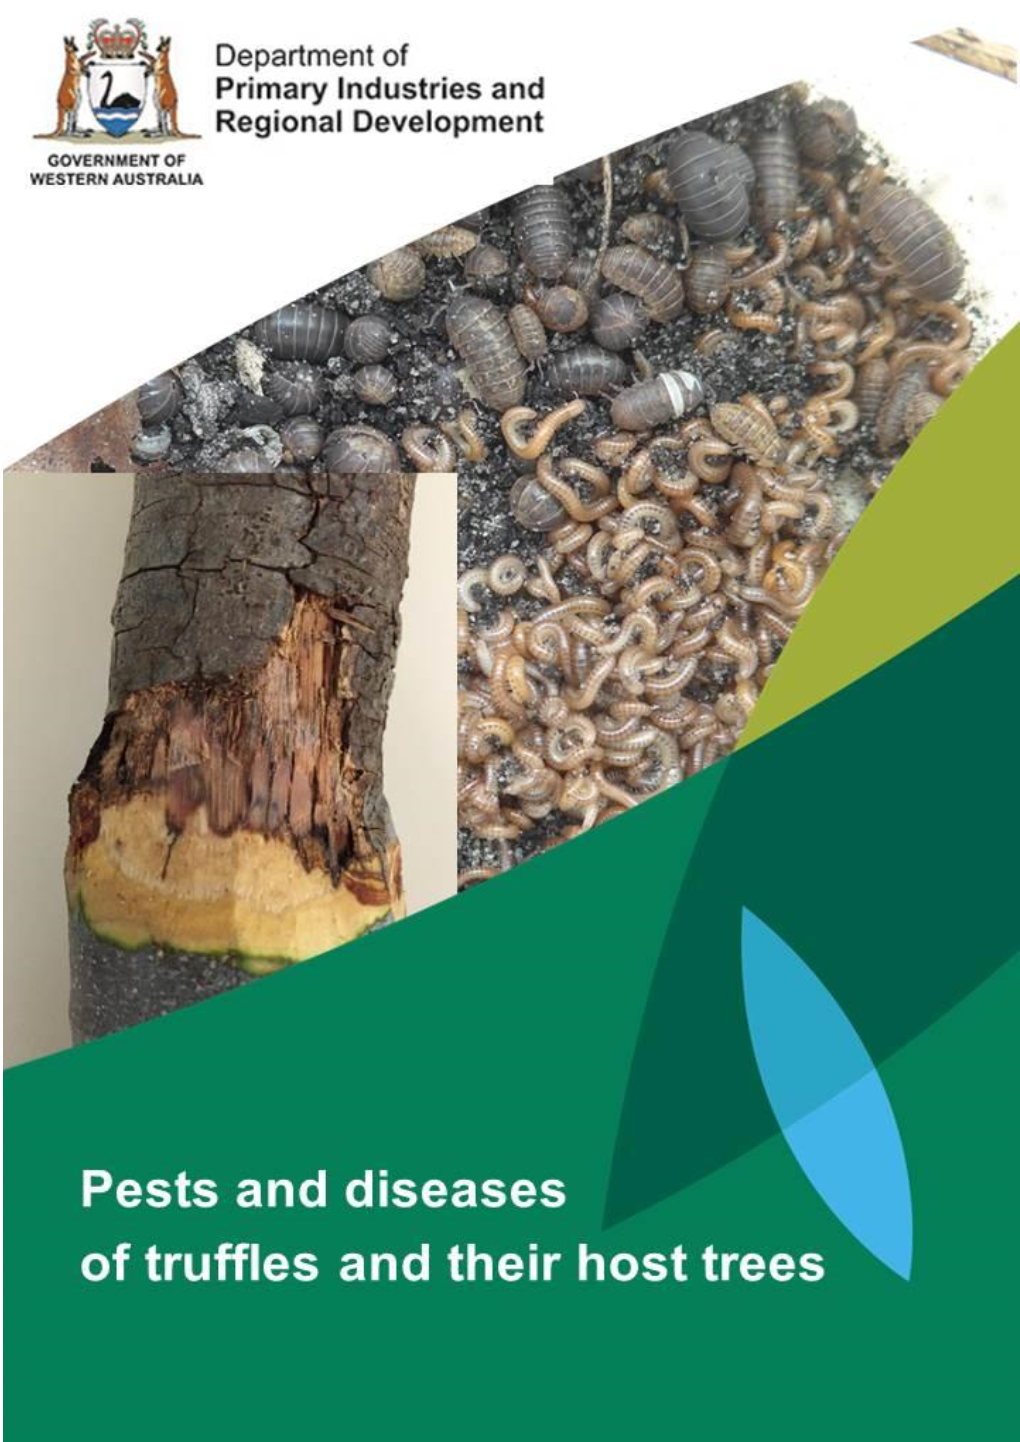 2017 Pest & Diseases of Truffles and Their Host Trees.Pdf